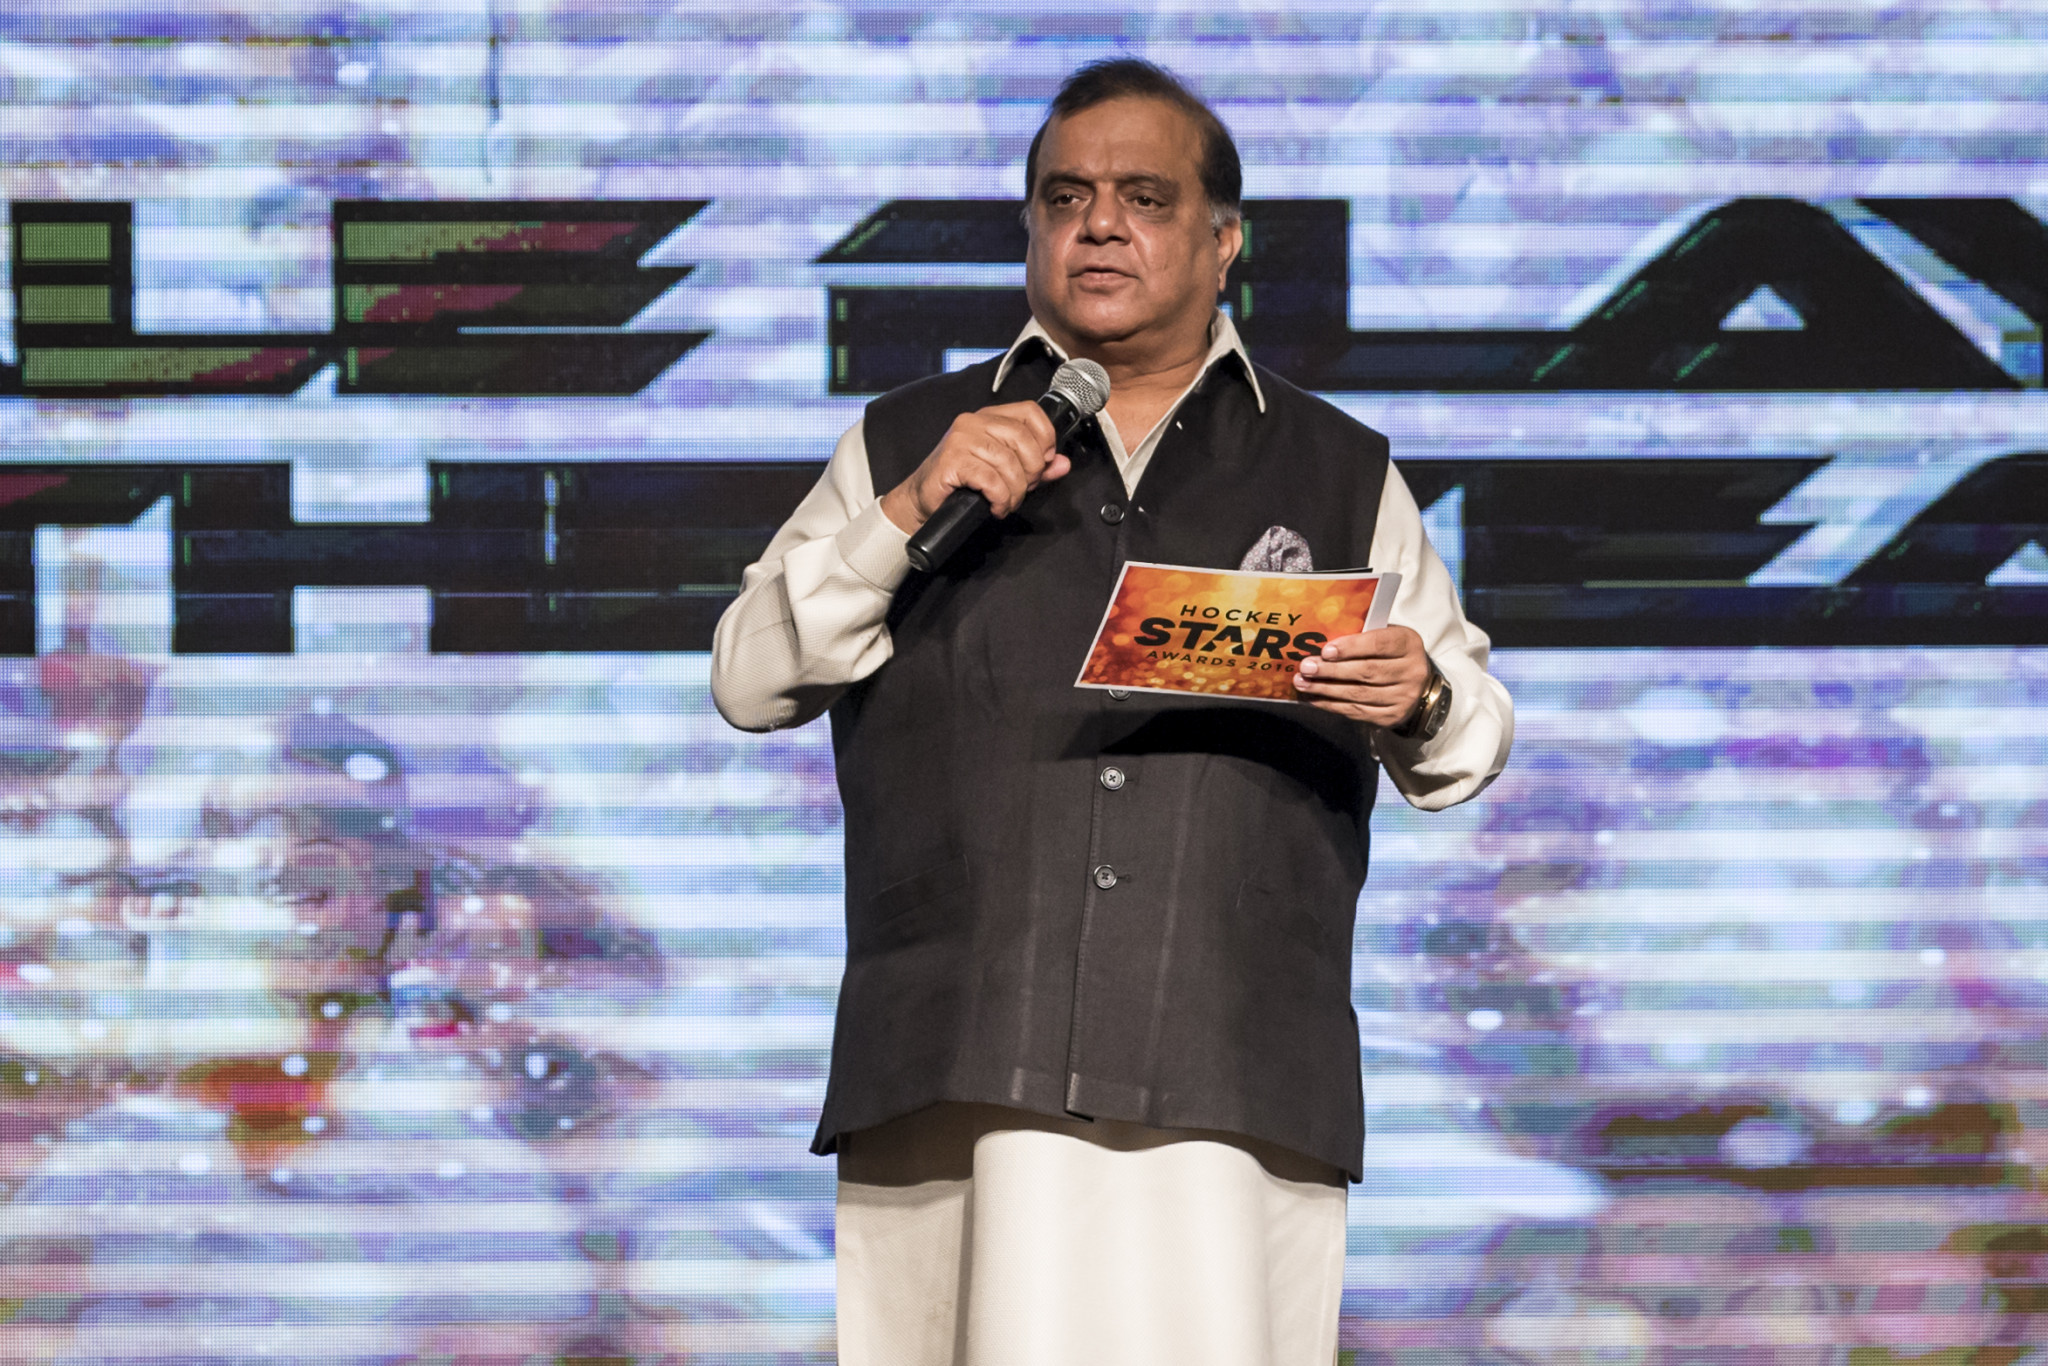 IOA President Narinder Batra asked to meet with India's Sports Minister to discuss the boycott ©Getty Images